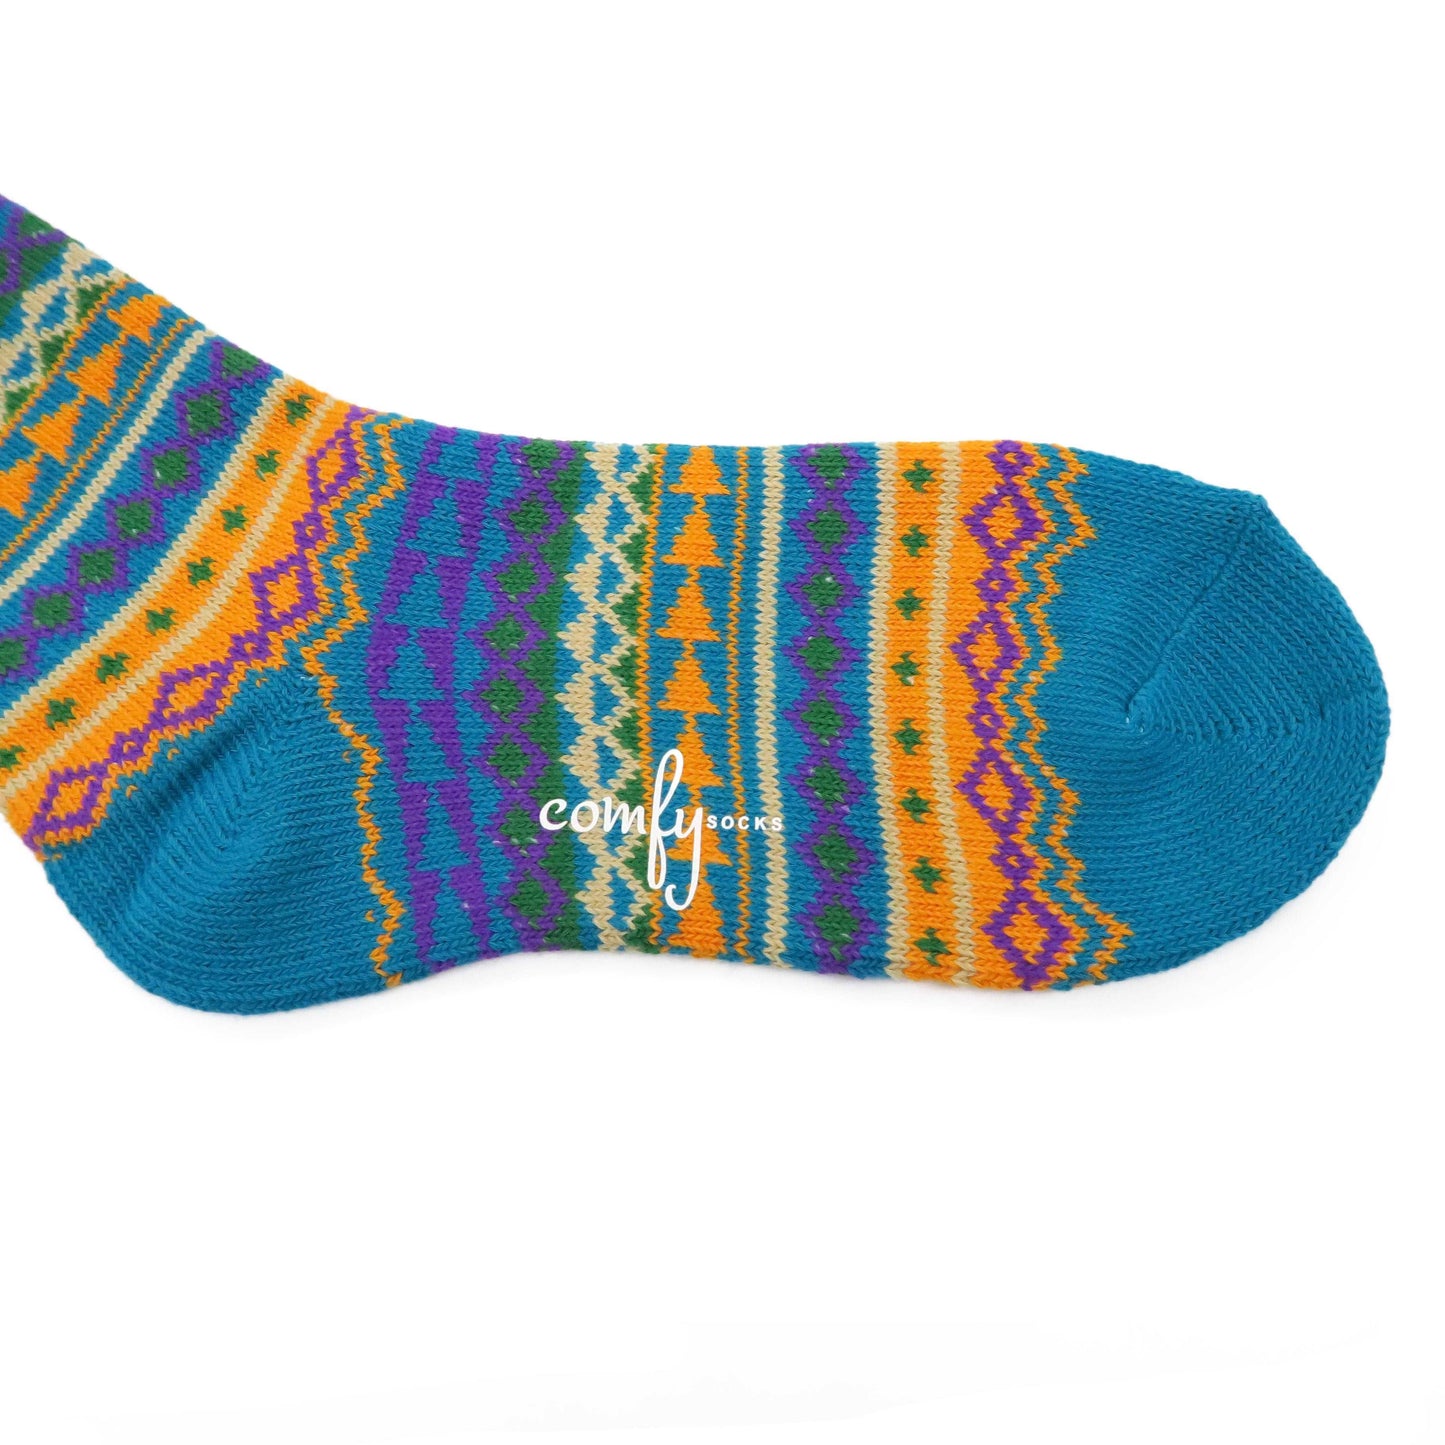 teal color with orange and purple pattern tribal socks